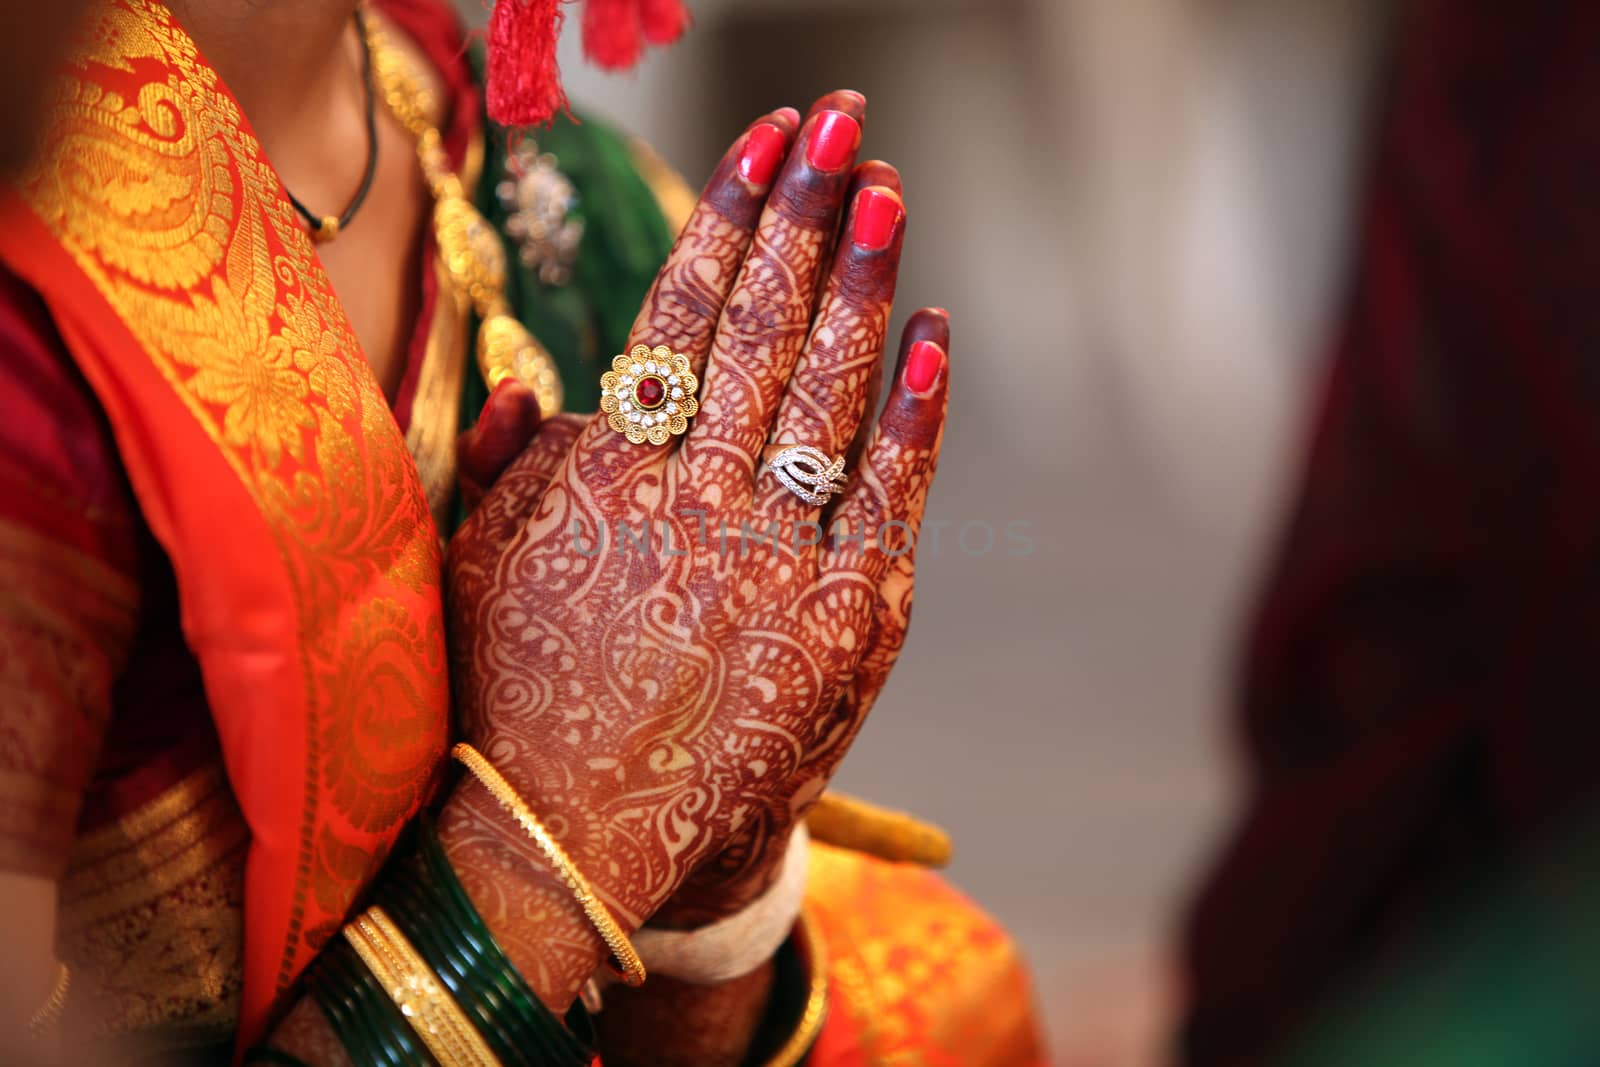 Folder hands of a traditional Indian bride in wedding attire, praying during her wedding.